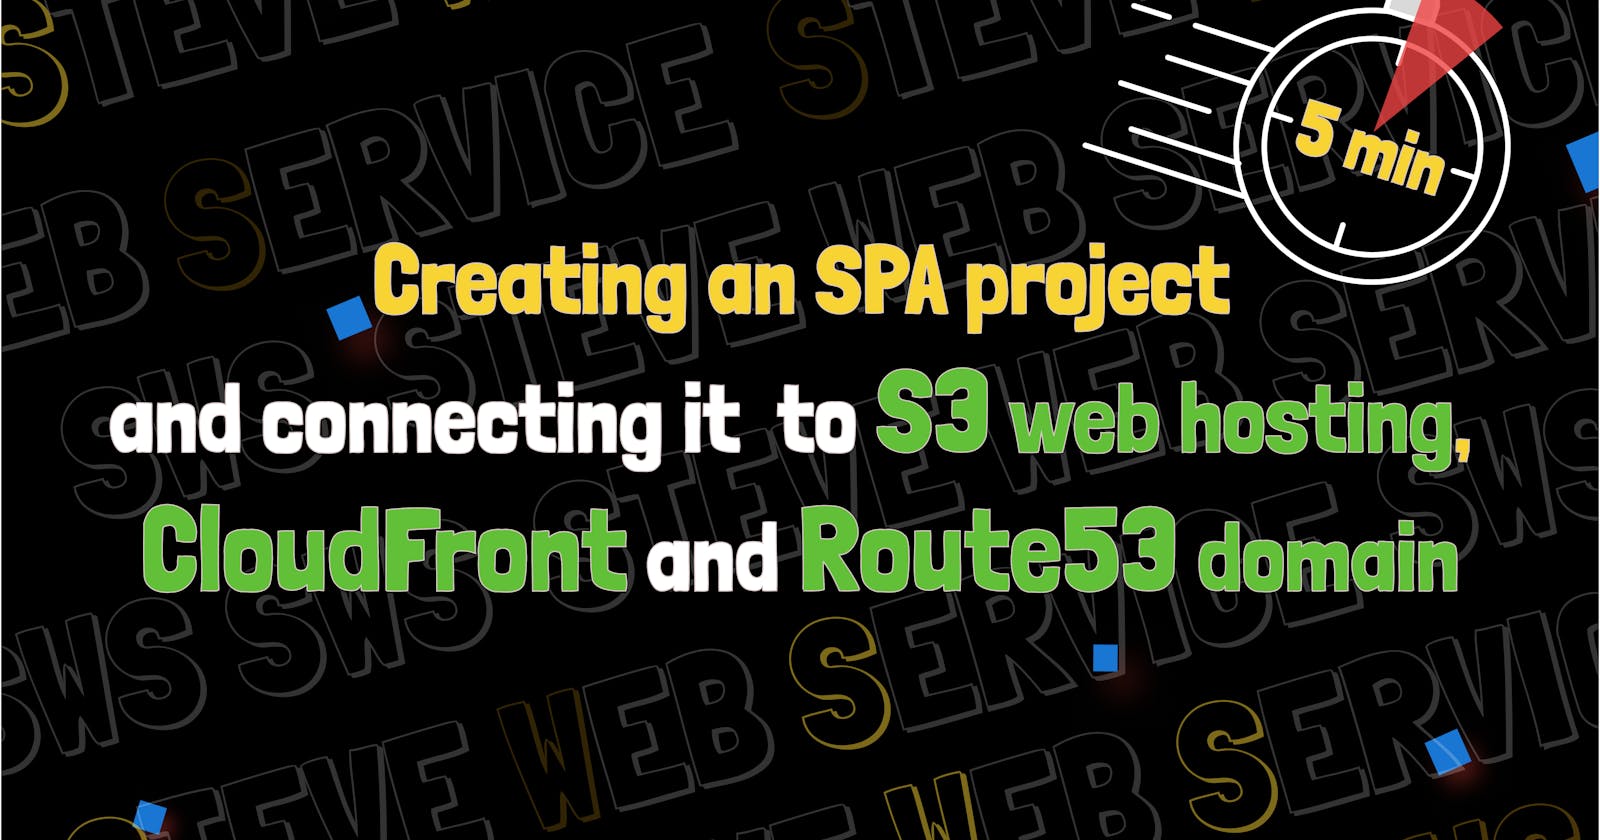 SWS Console: Creating an SPA project and connecting it to S3 web hosting, CloudFront, and Route53 domain in 5 minutes.